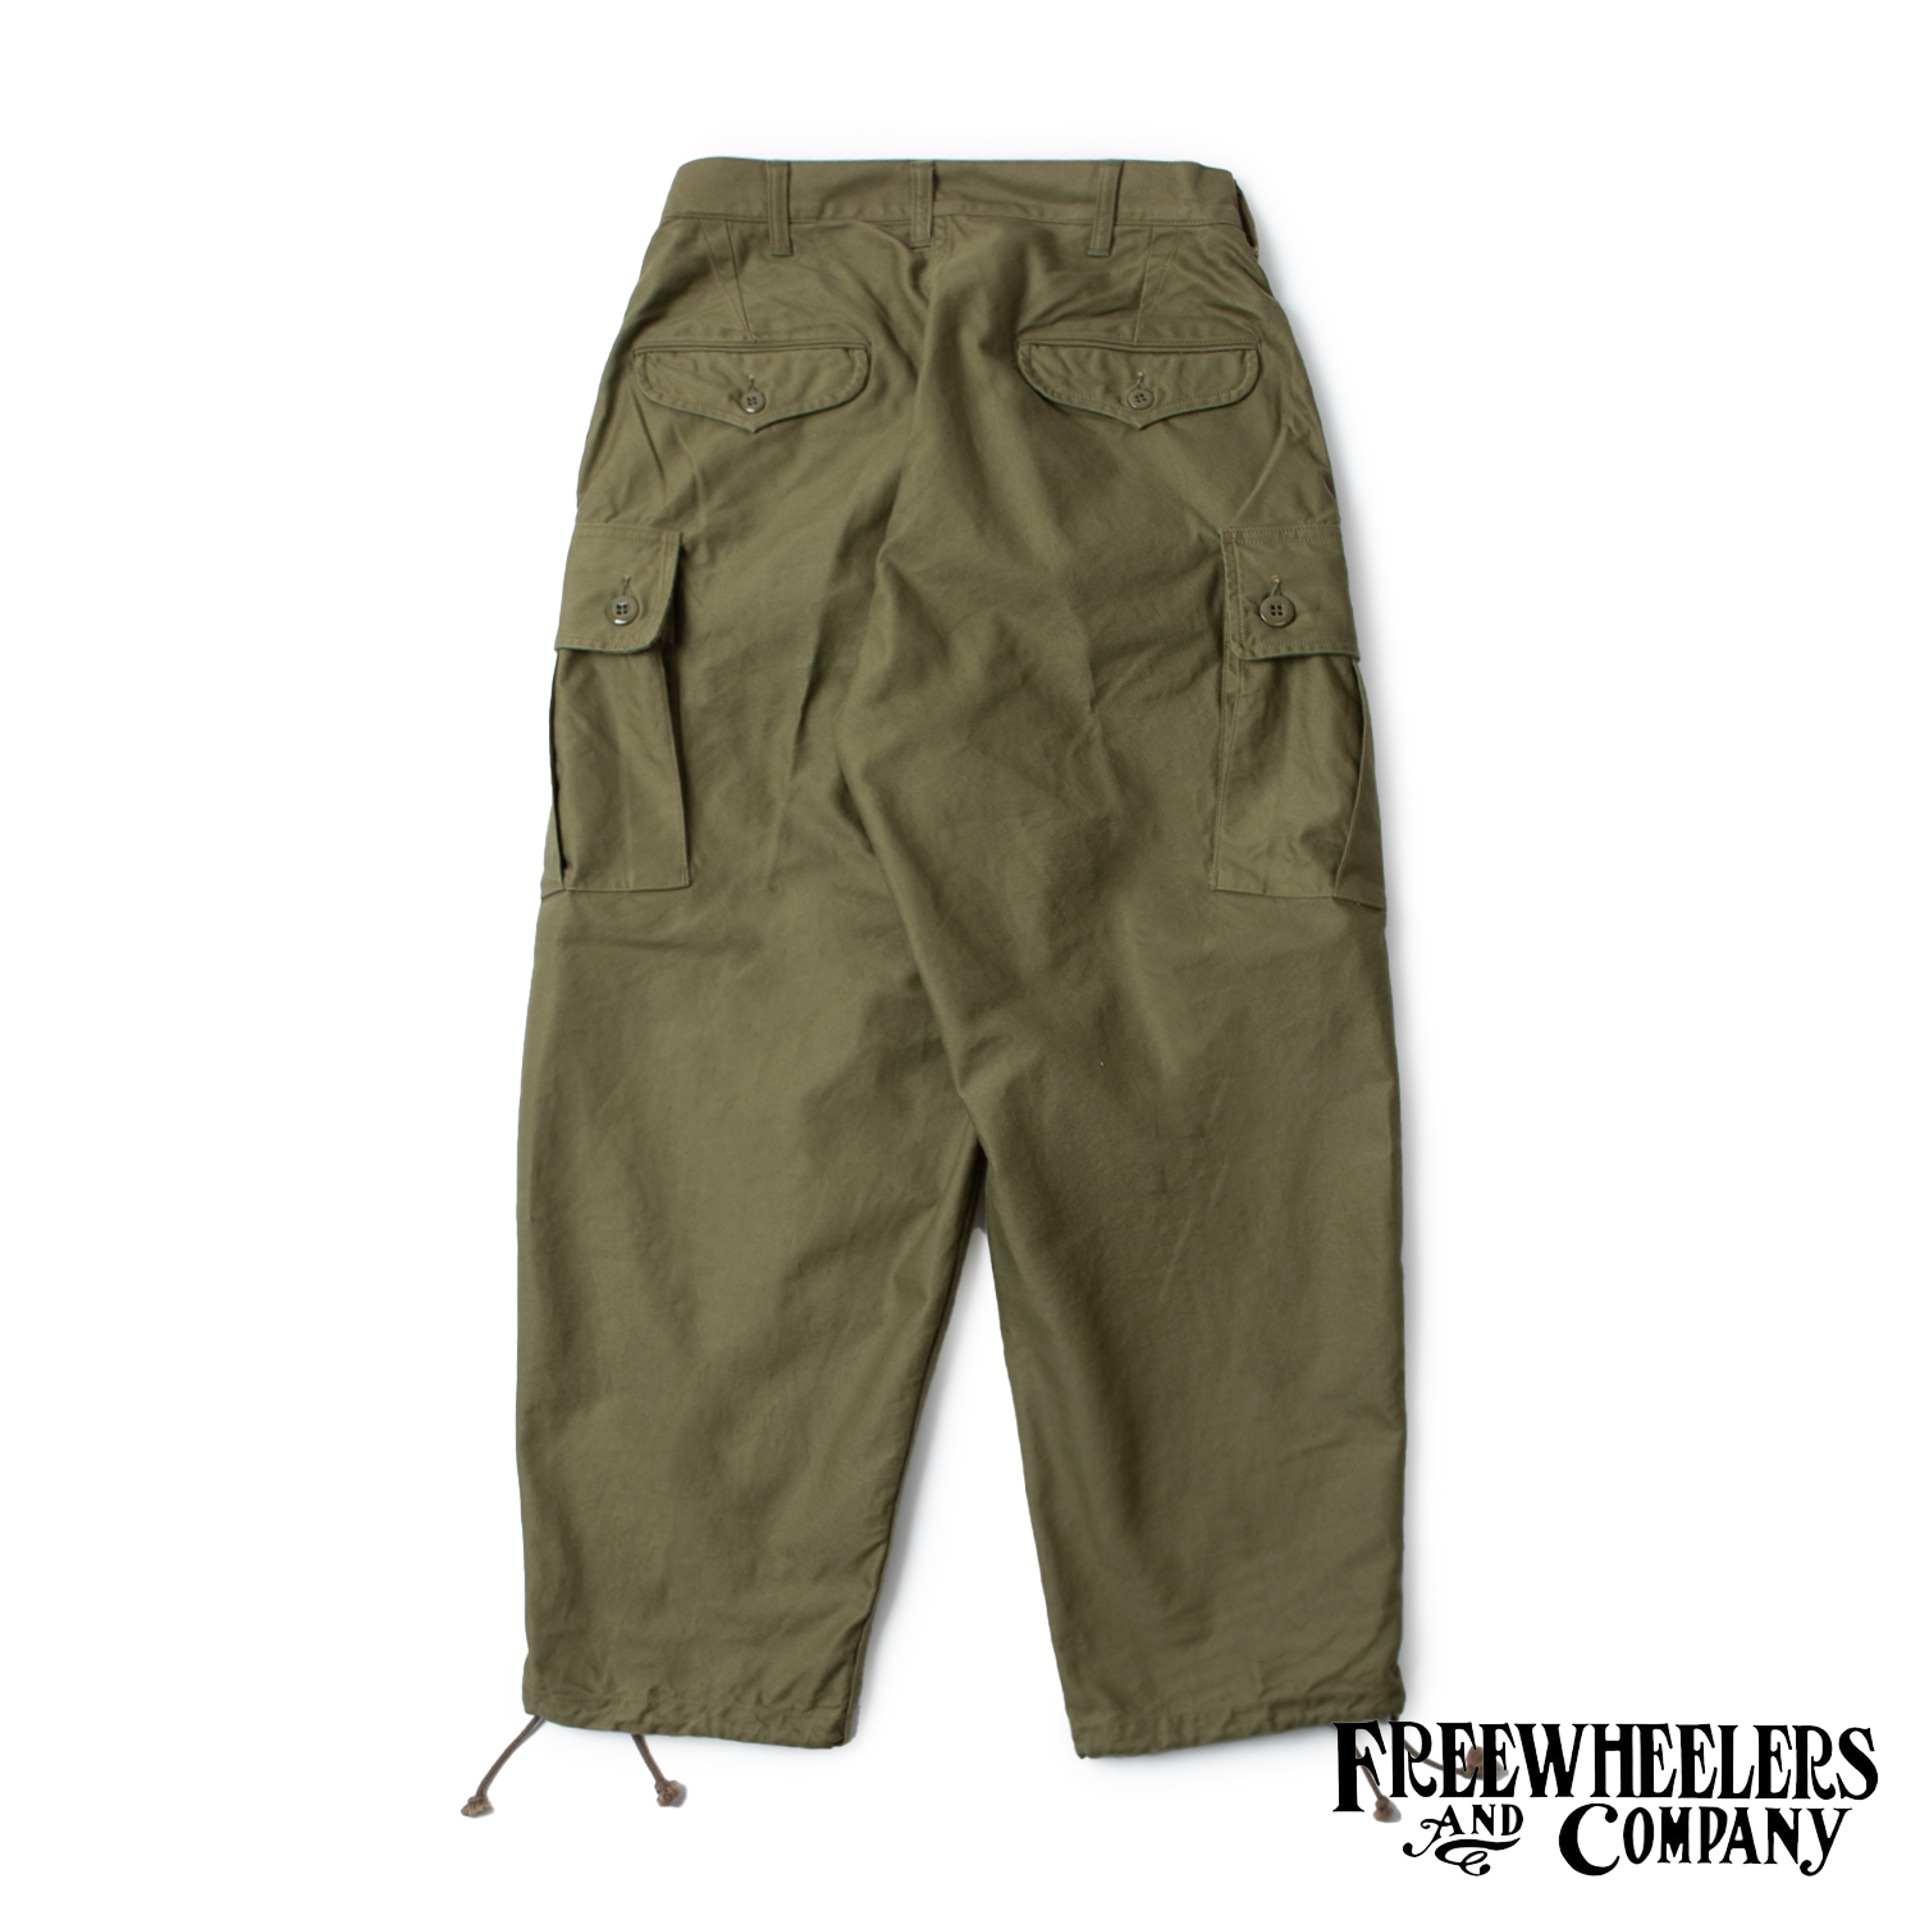  [UNION SPECIAL OVERALLS]   Military Tropical Trousers  “JUNGLE FATIGUES”  (Olive)